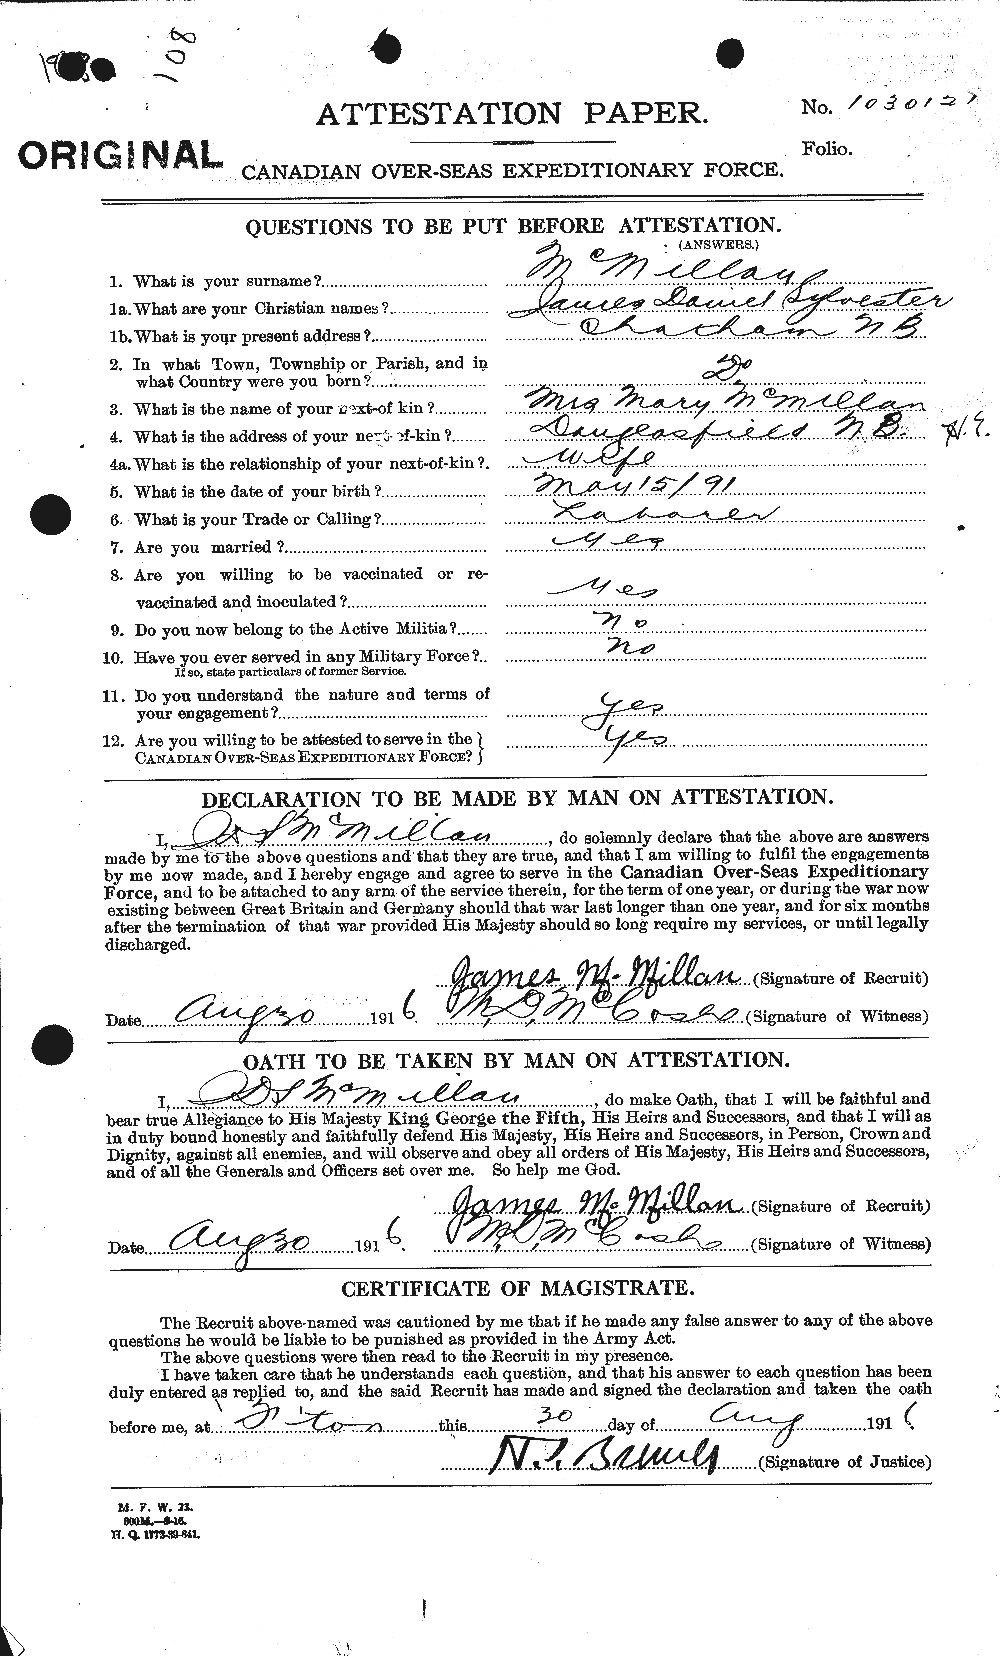 Personnel Records of the First World War - CEF 543934a